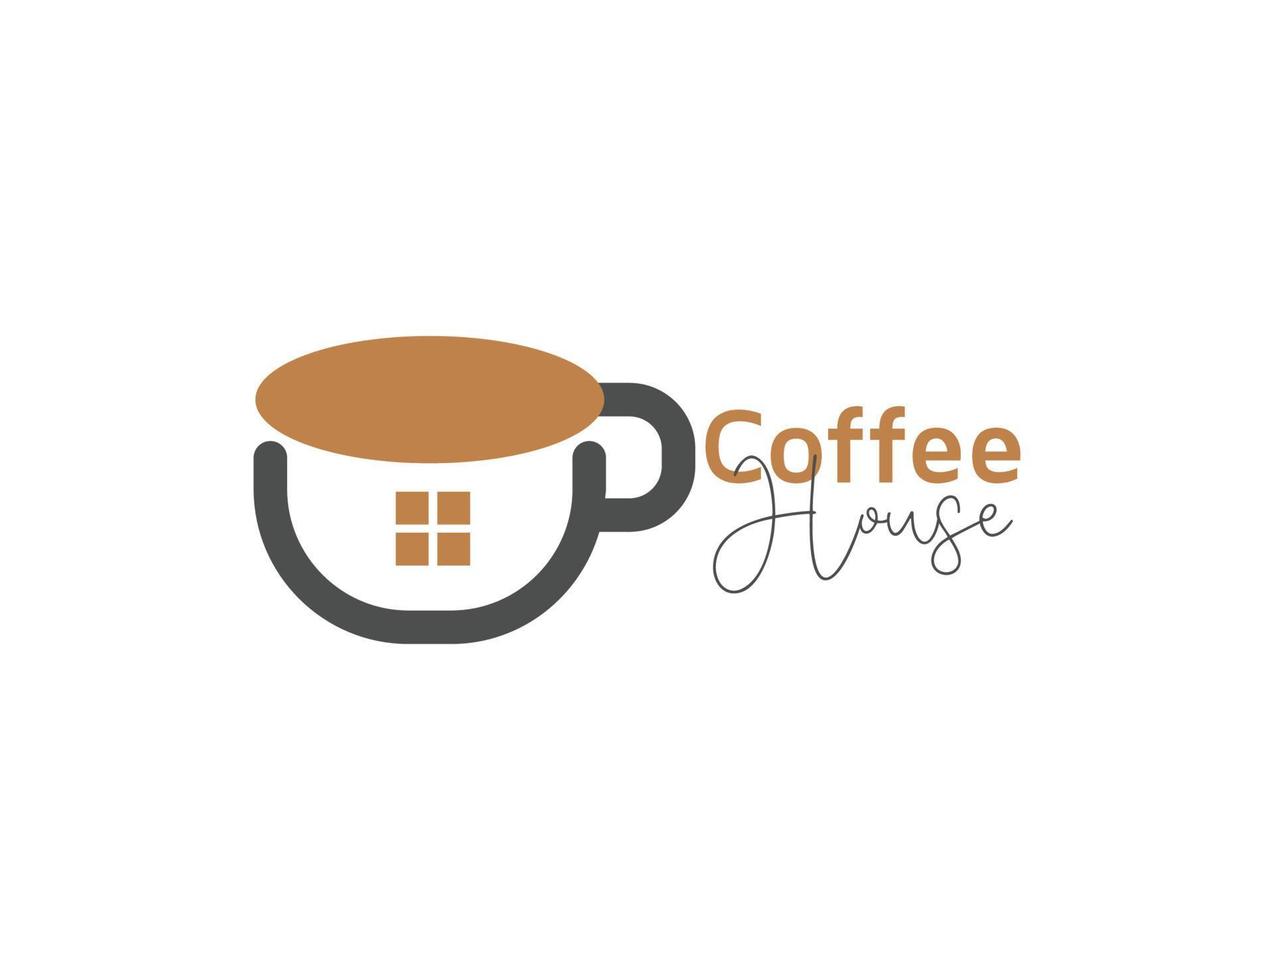 Coffee house logo with coffee cup illustration vector